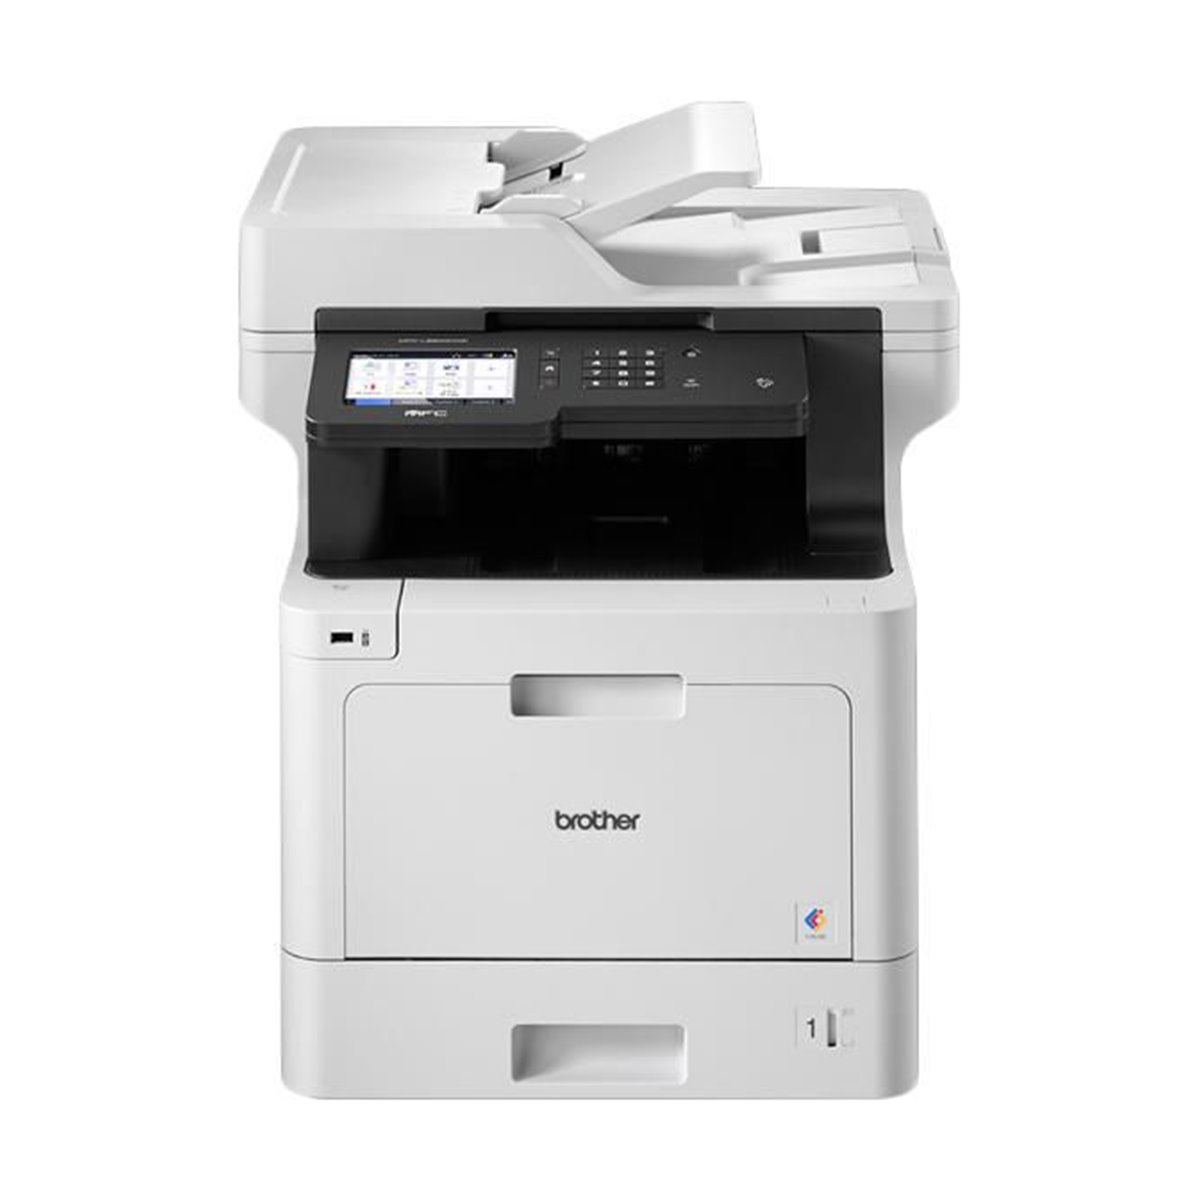 Brother MFC-L8900CDW MFP ColorL. 31ppm Nordic model - Multi language - Multifunction Printer - Laser-Led